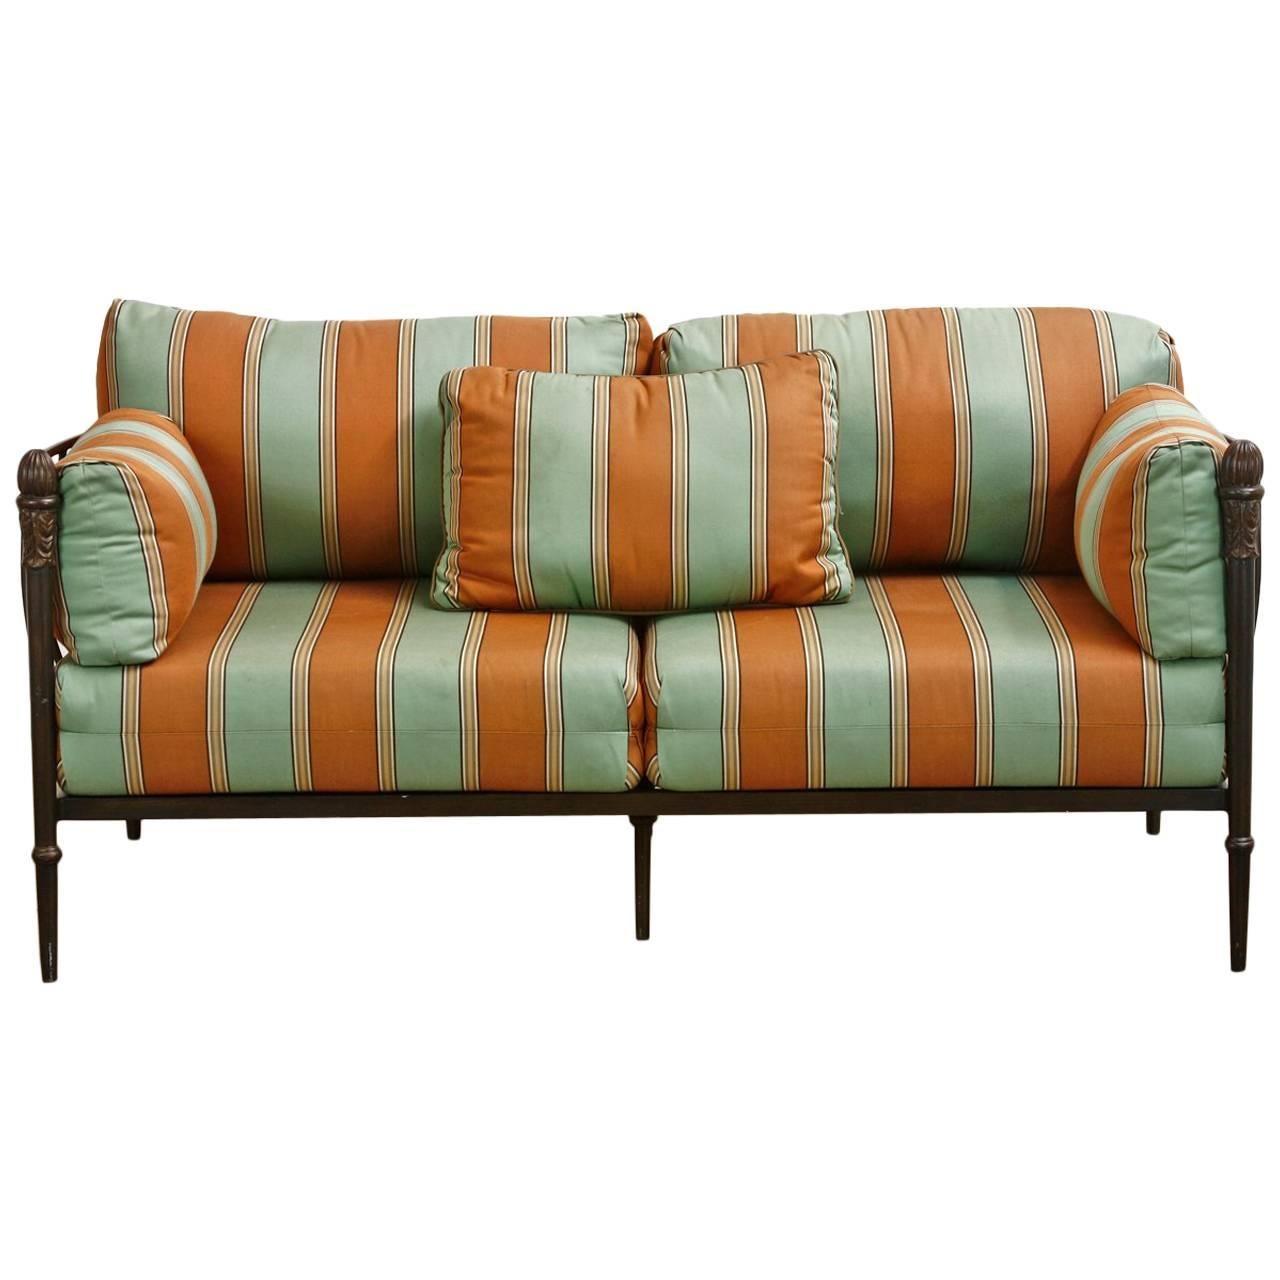 Fabulous Michael Taylor design iron settee or loveseat from his famous Montecito Collection. Features a patinated bronze finish with whimsical striped upholstery. This rare settee has an iron frame that cradles the deep cushions with bowed sides and